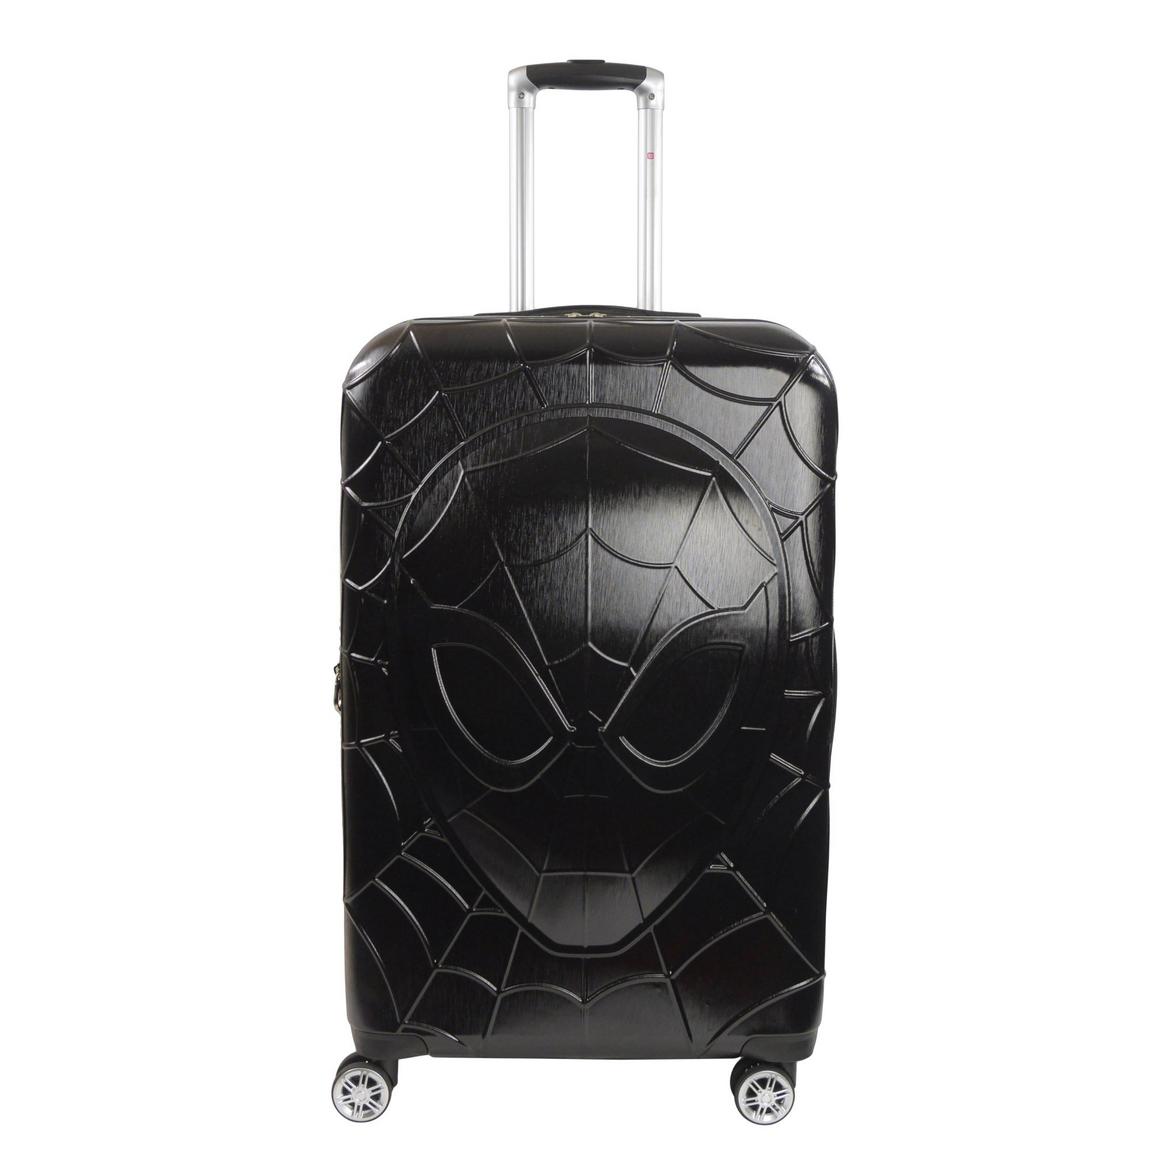 Concept One Marvel Ful Molded Spiderman 8 Wheel Expandable Spinner 29 inch luggage - Black